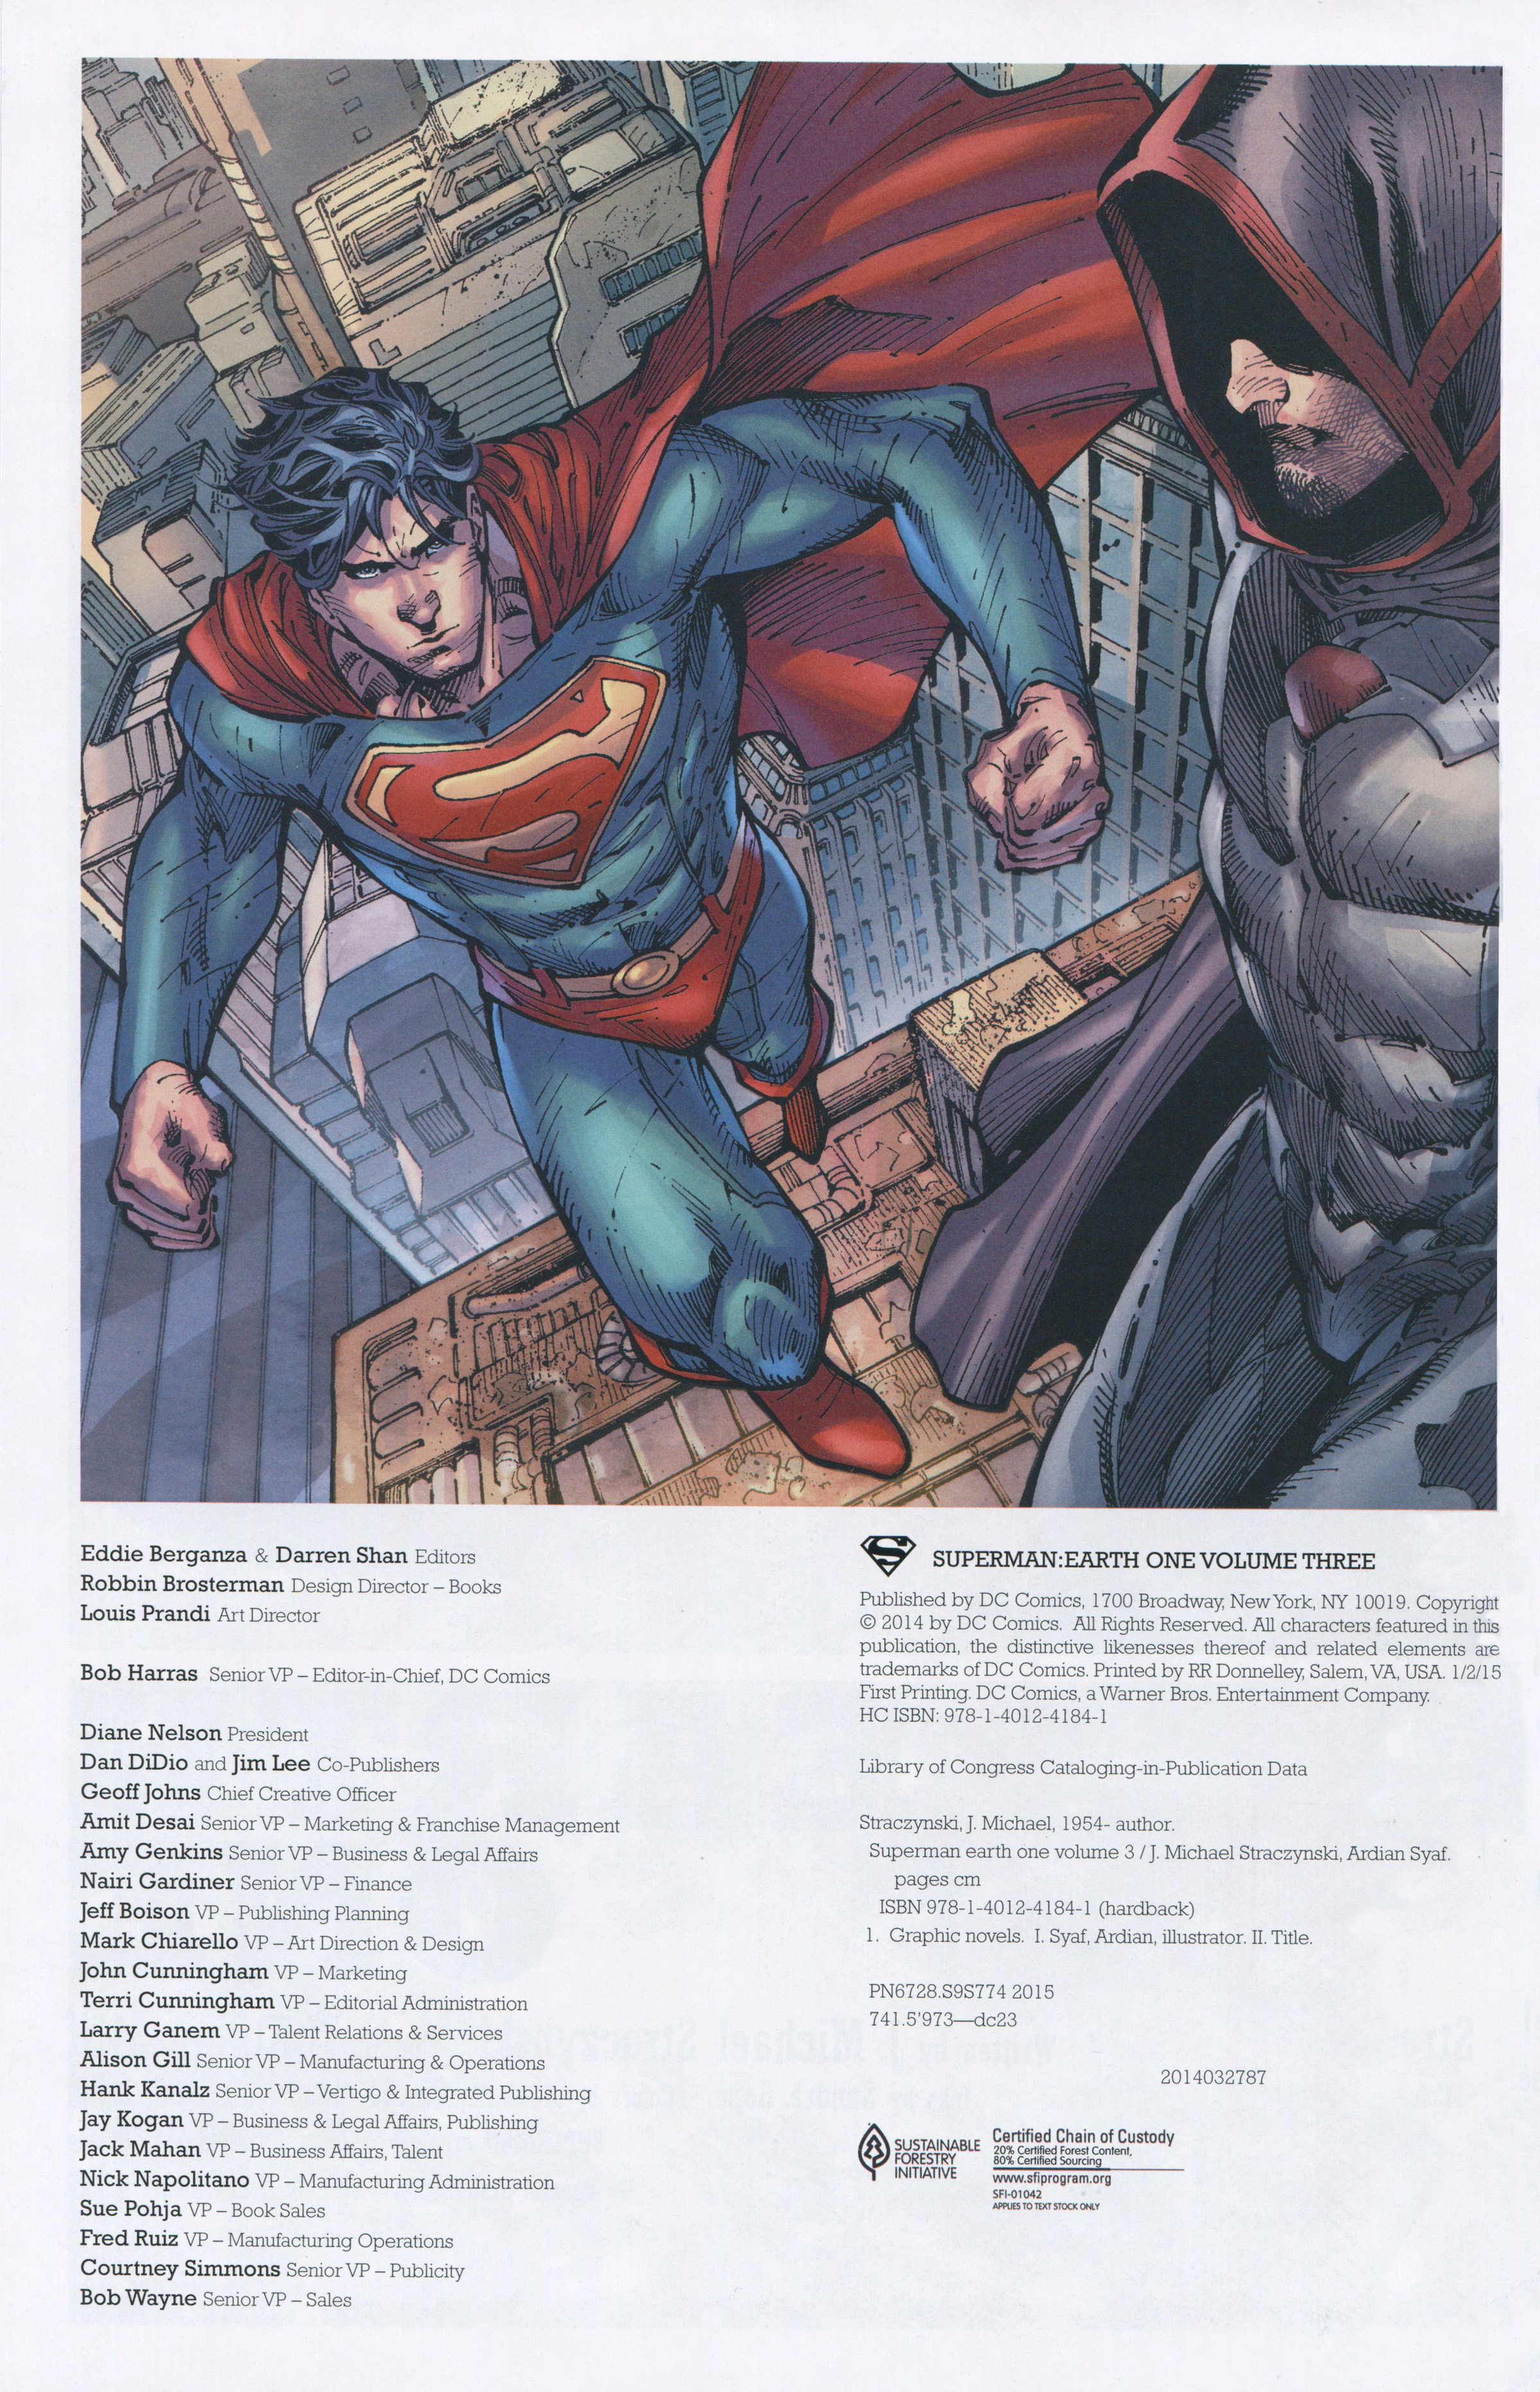 Read online Superman: Earth One comic -  Issue # TPB 3 - 4